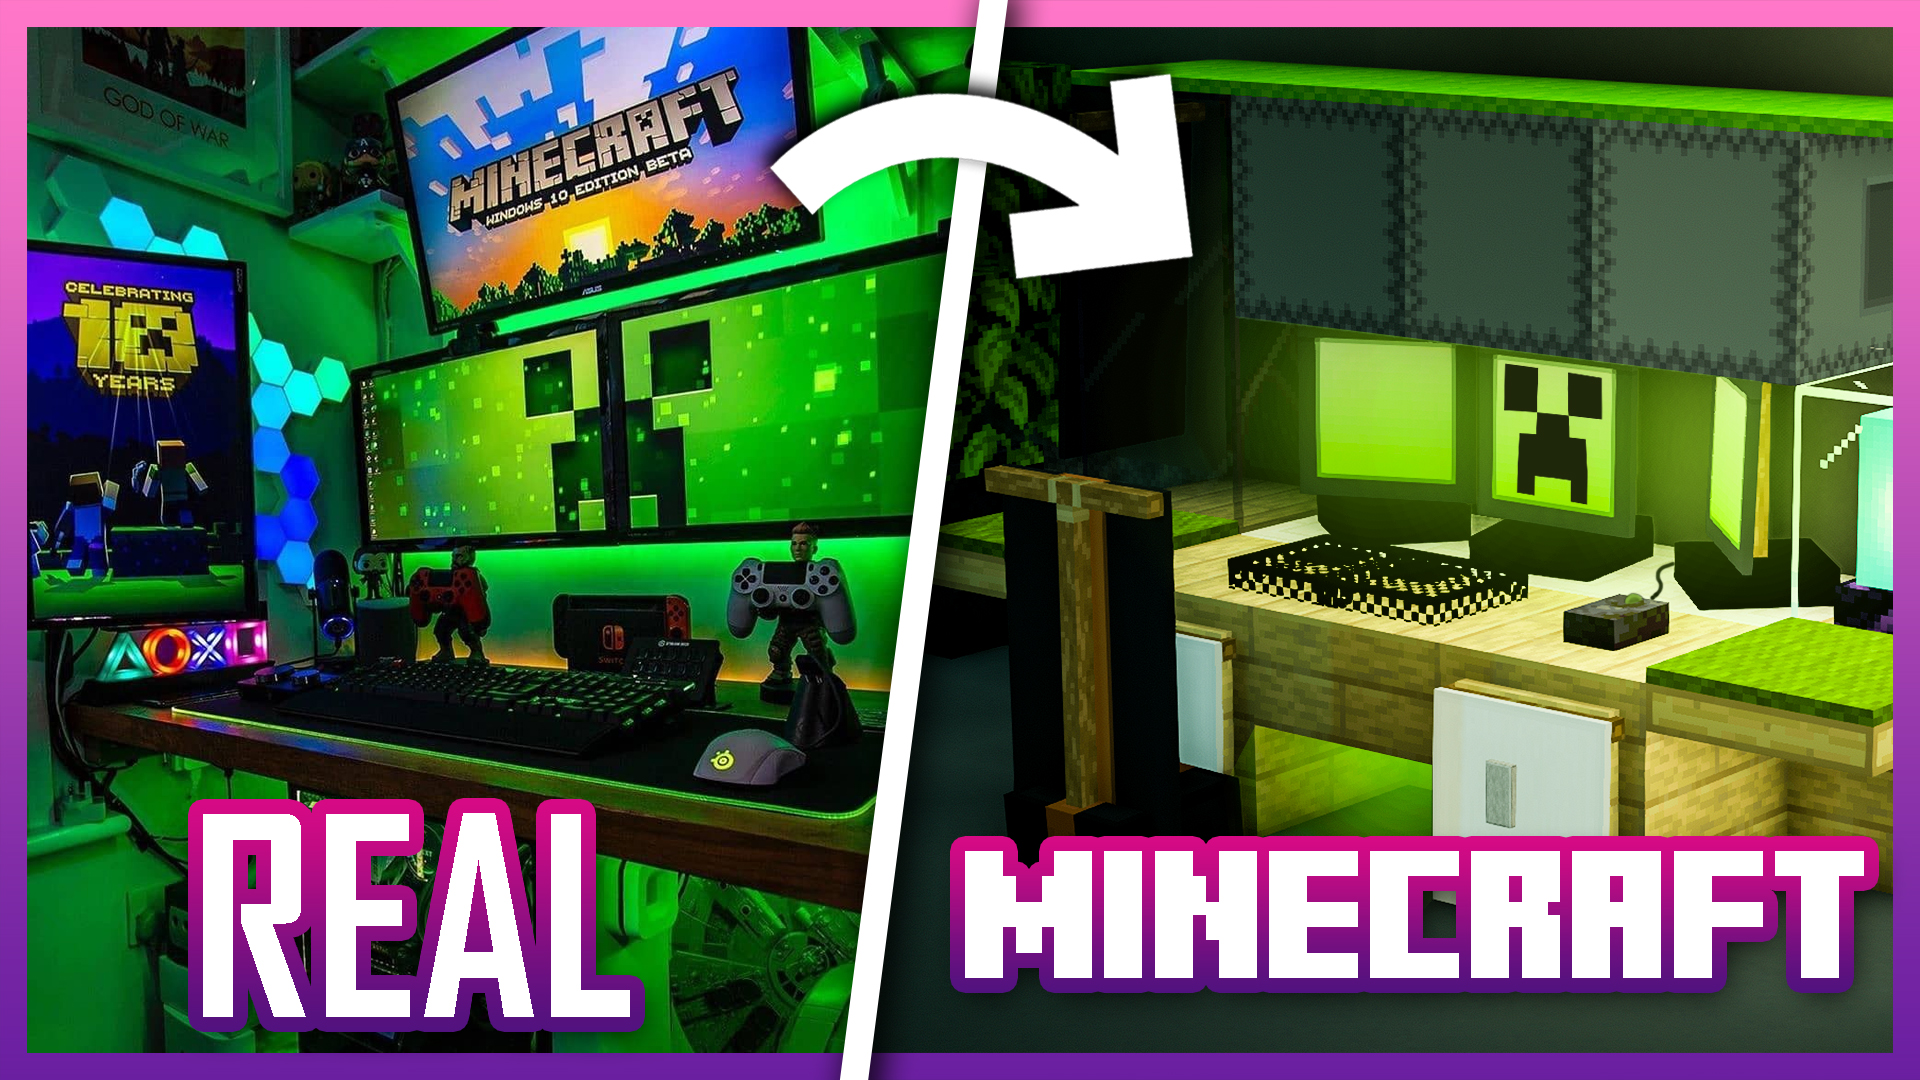 Blockception on Twitter: "🖥 Want to bring your home PC and RBG setup to # Minecraft? we have 3 gaming designs that you can build for your rooms in game 💻